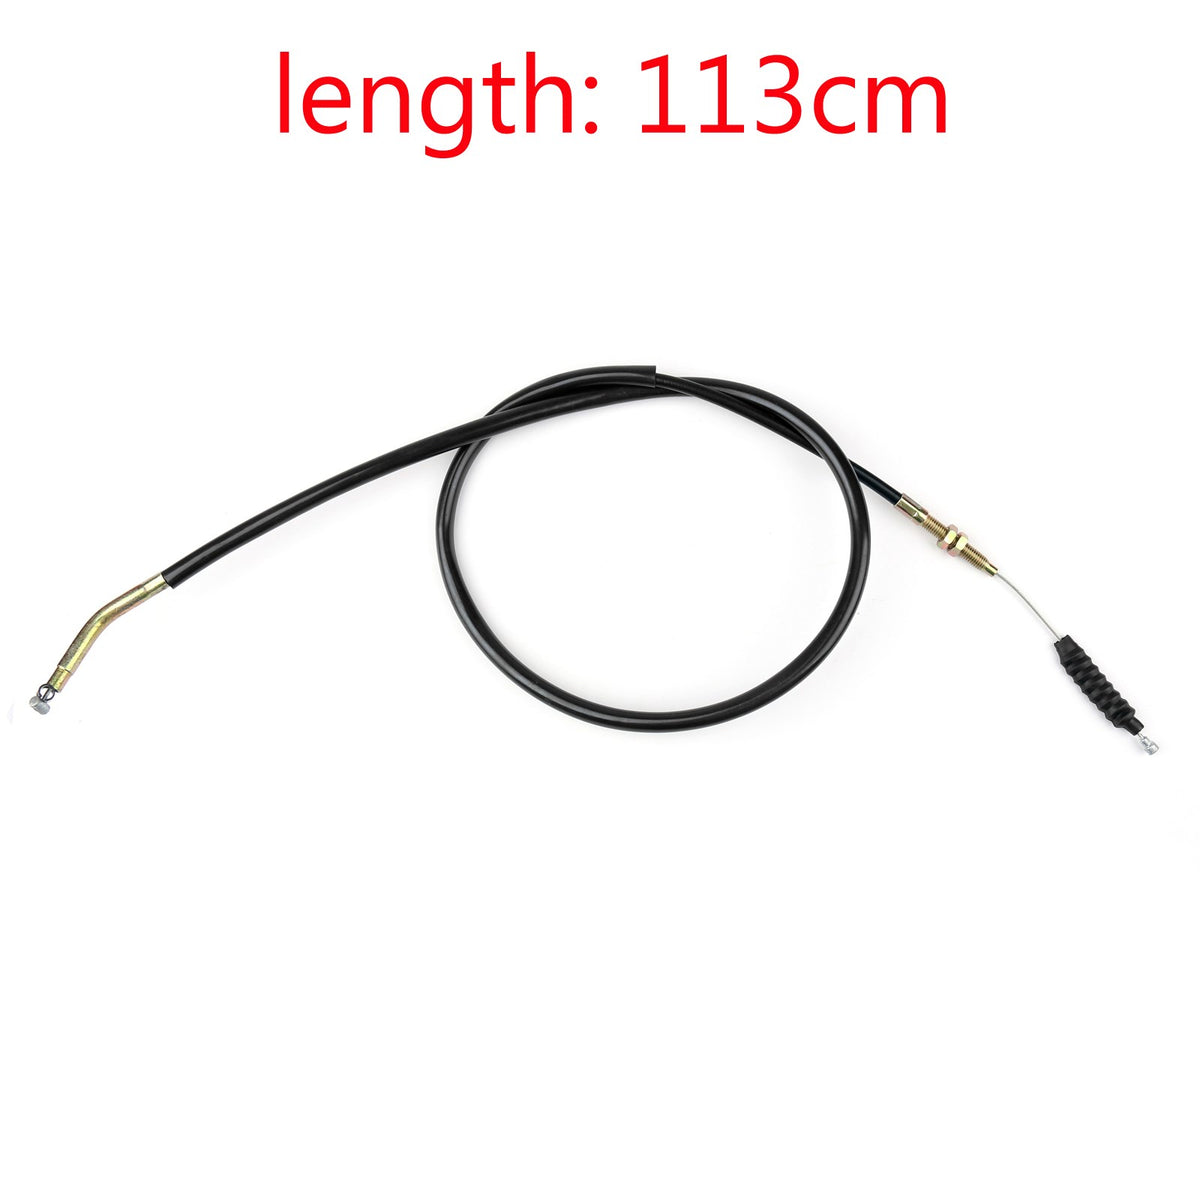 Wire Steel Clutch Cable Replacement For Yamaha XVS1100 V-star 1100